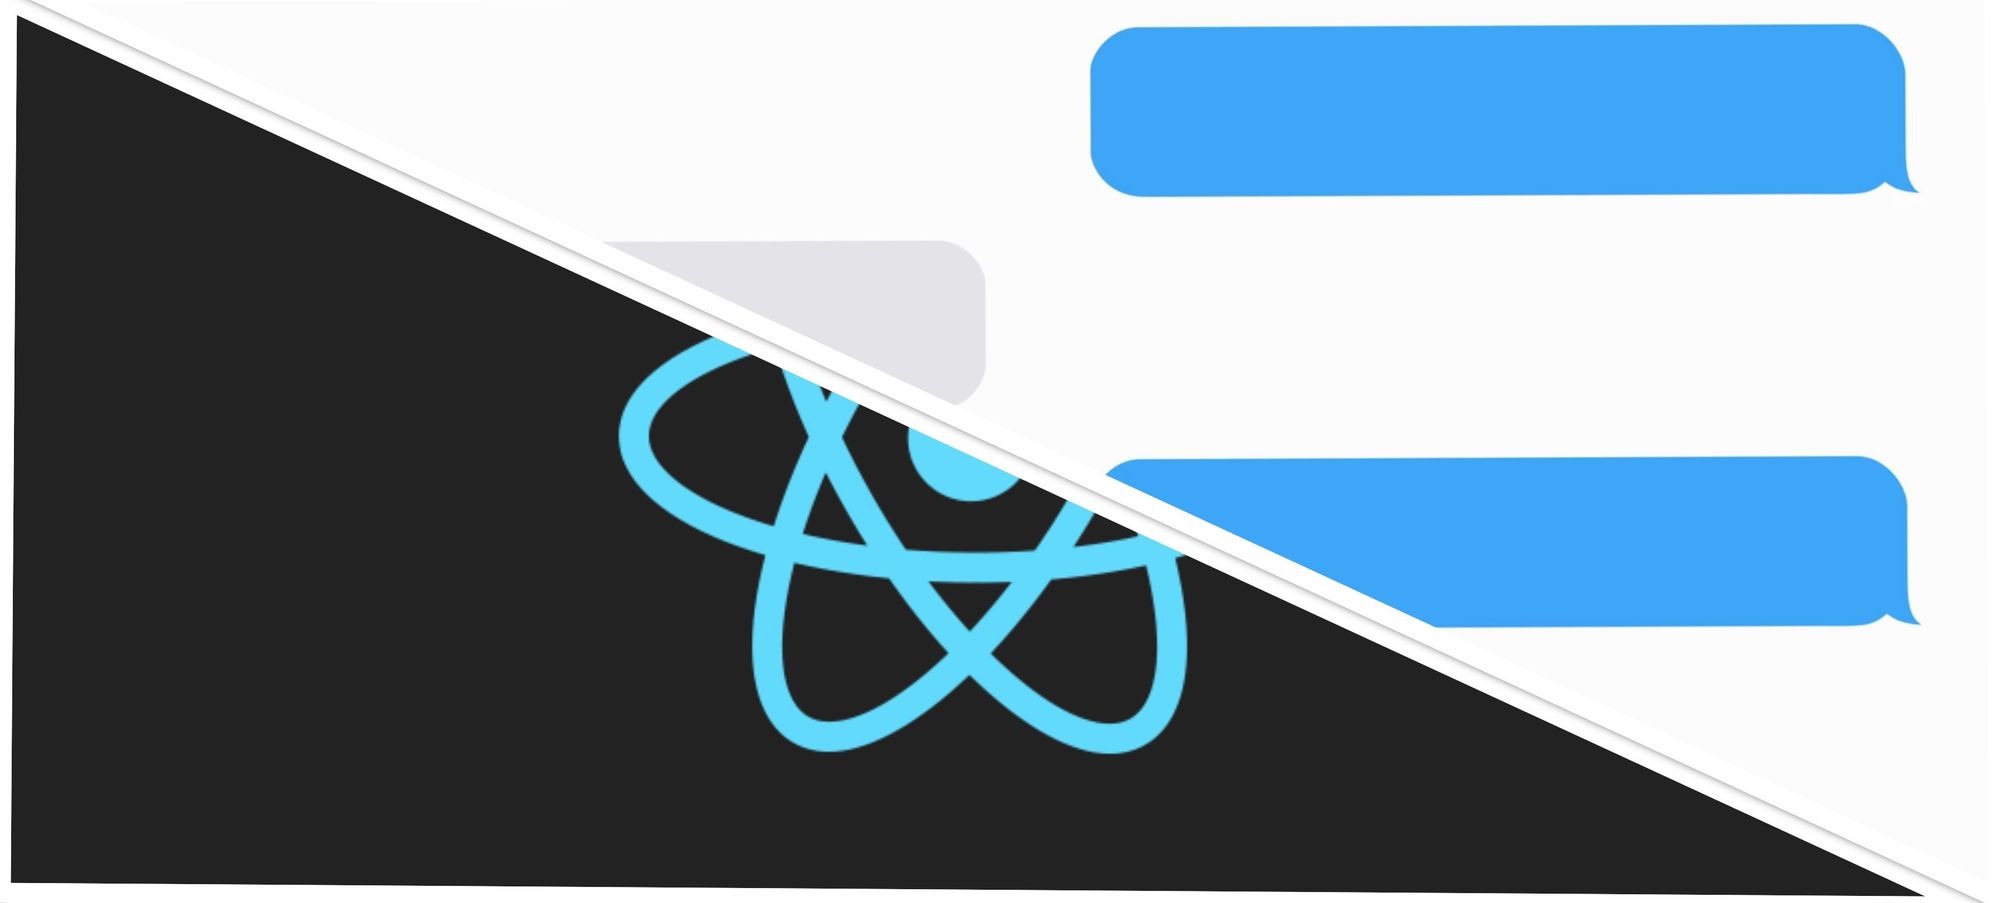 How to Design an iMessage-like Chat Bubble in React Native